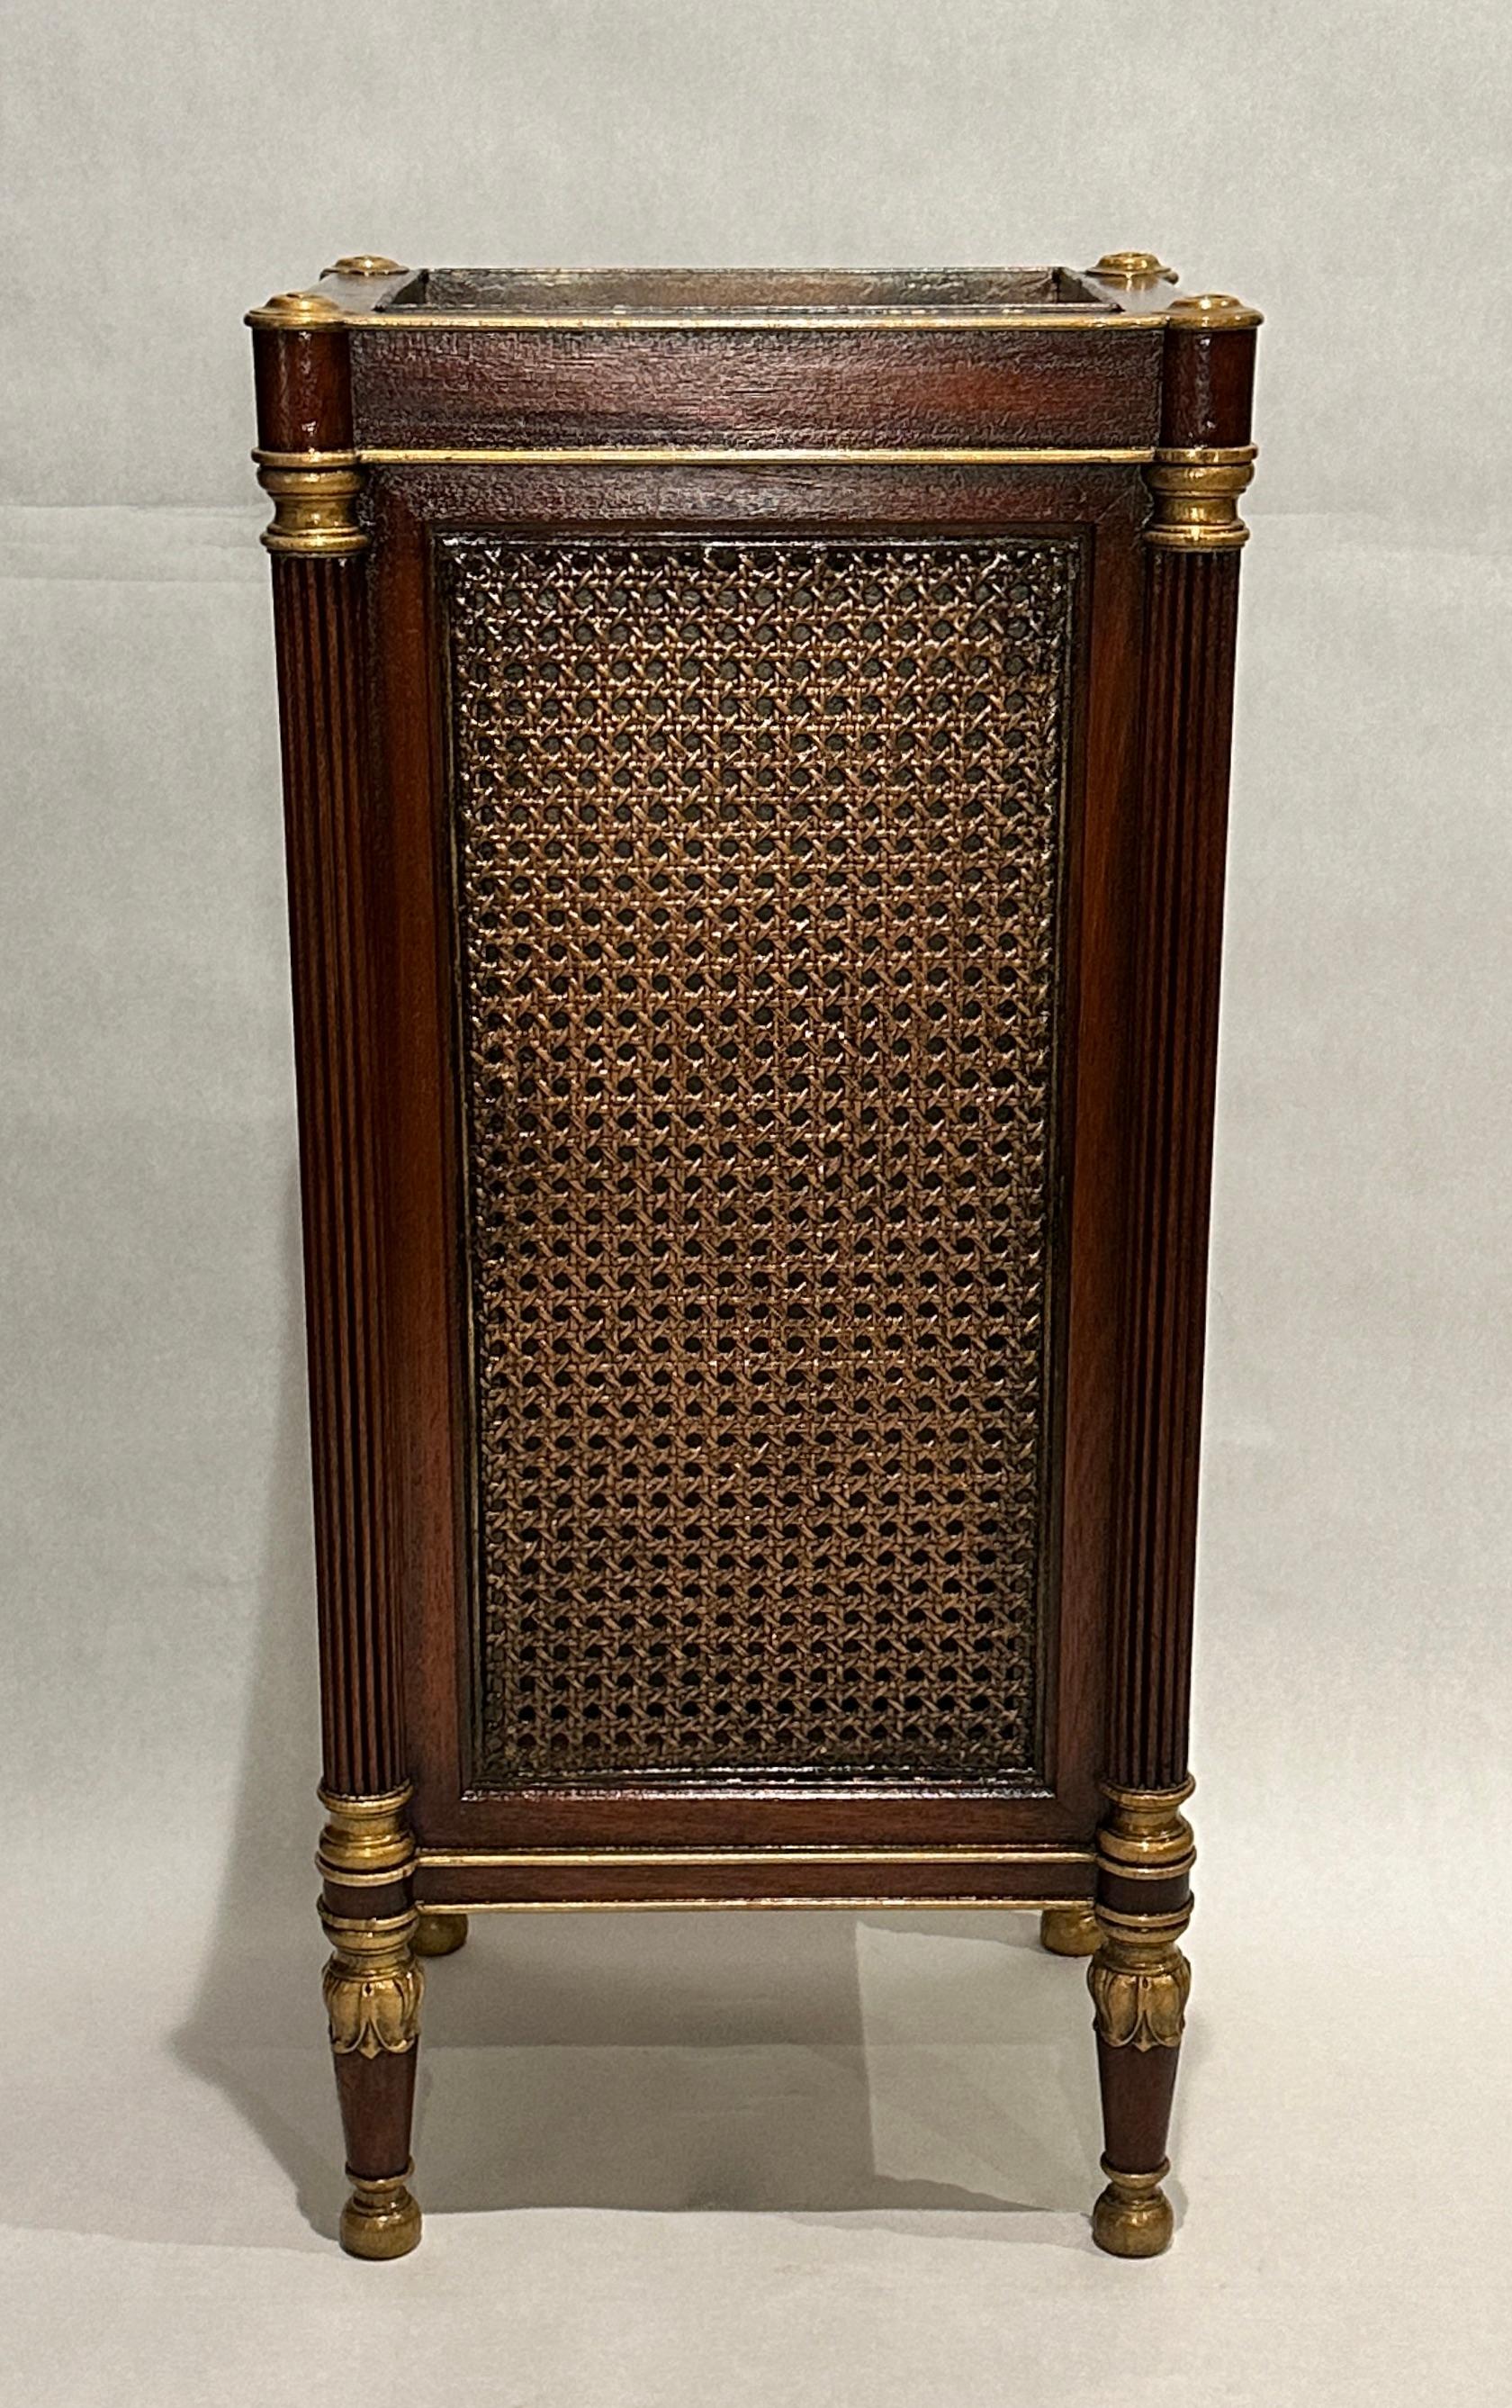 Carved and gilt mahogany umbrella/stick stand with cane panels. Fluted column corners with carved acanthus leaf tapered legs.
8